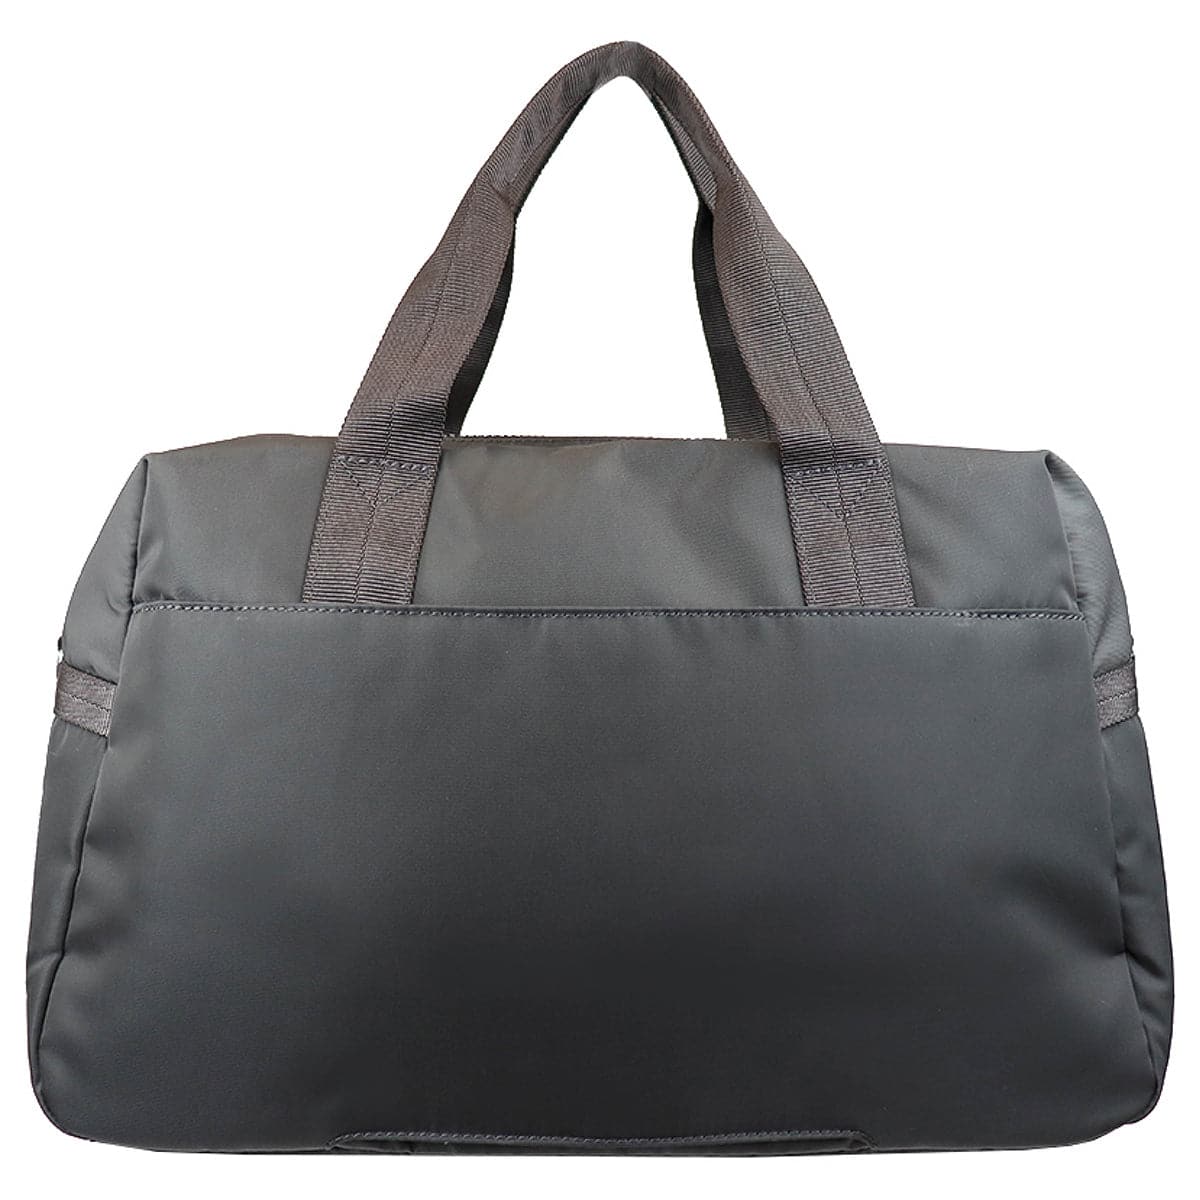 Hedgren Micaela Sustainably Made Duffel Bag